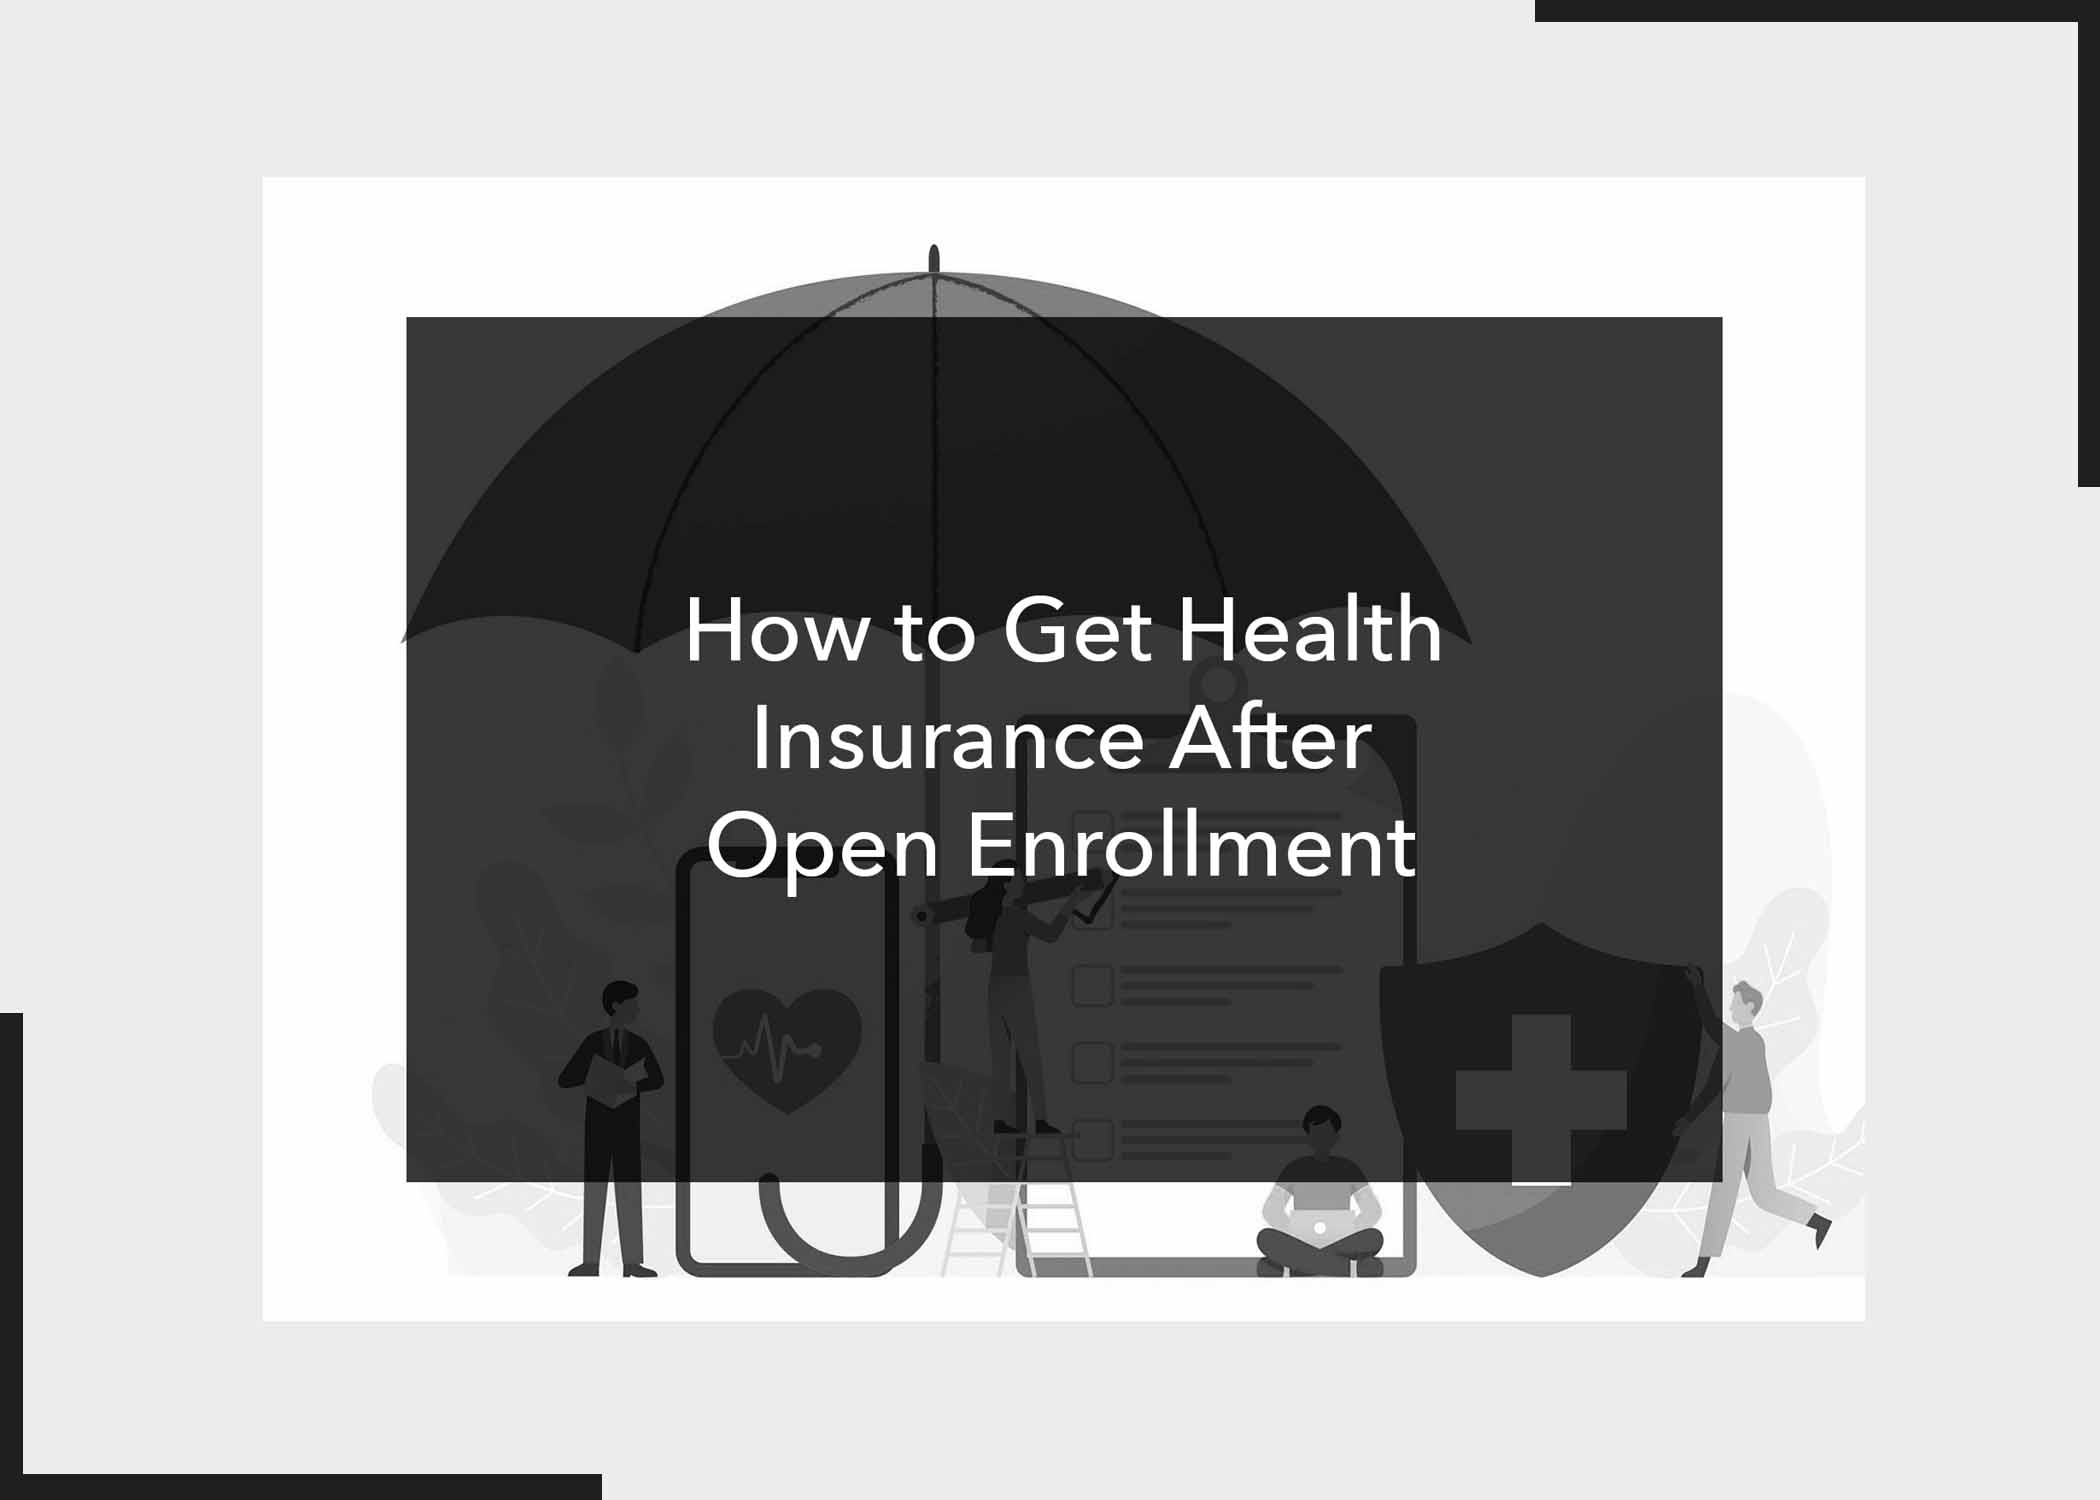 How to Get Health Insurance After Open Enrollment